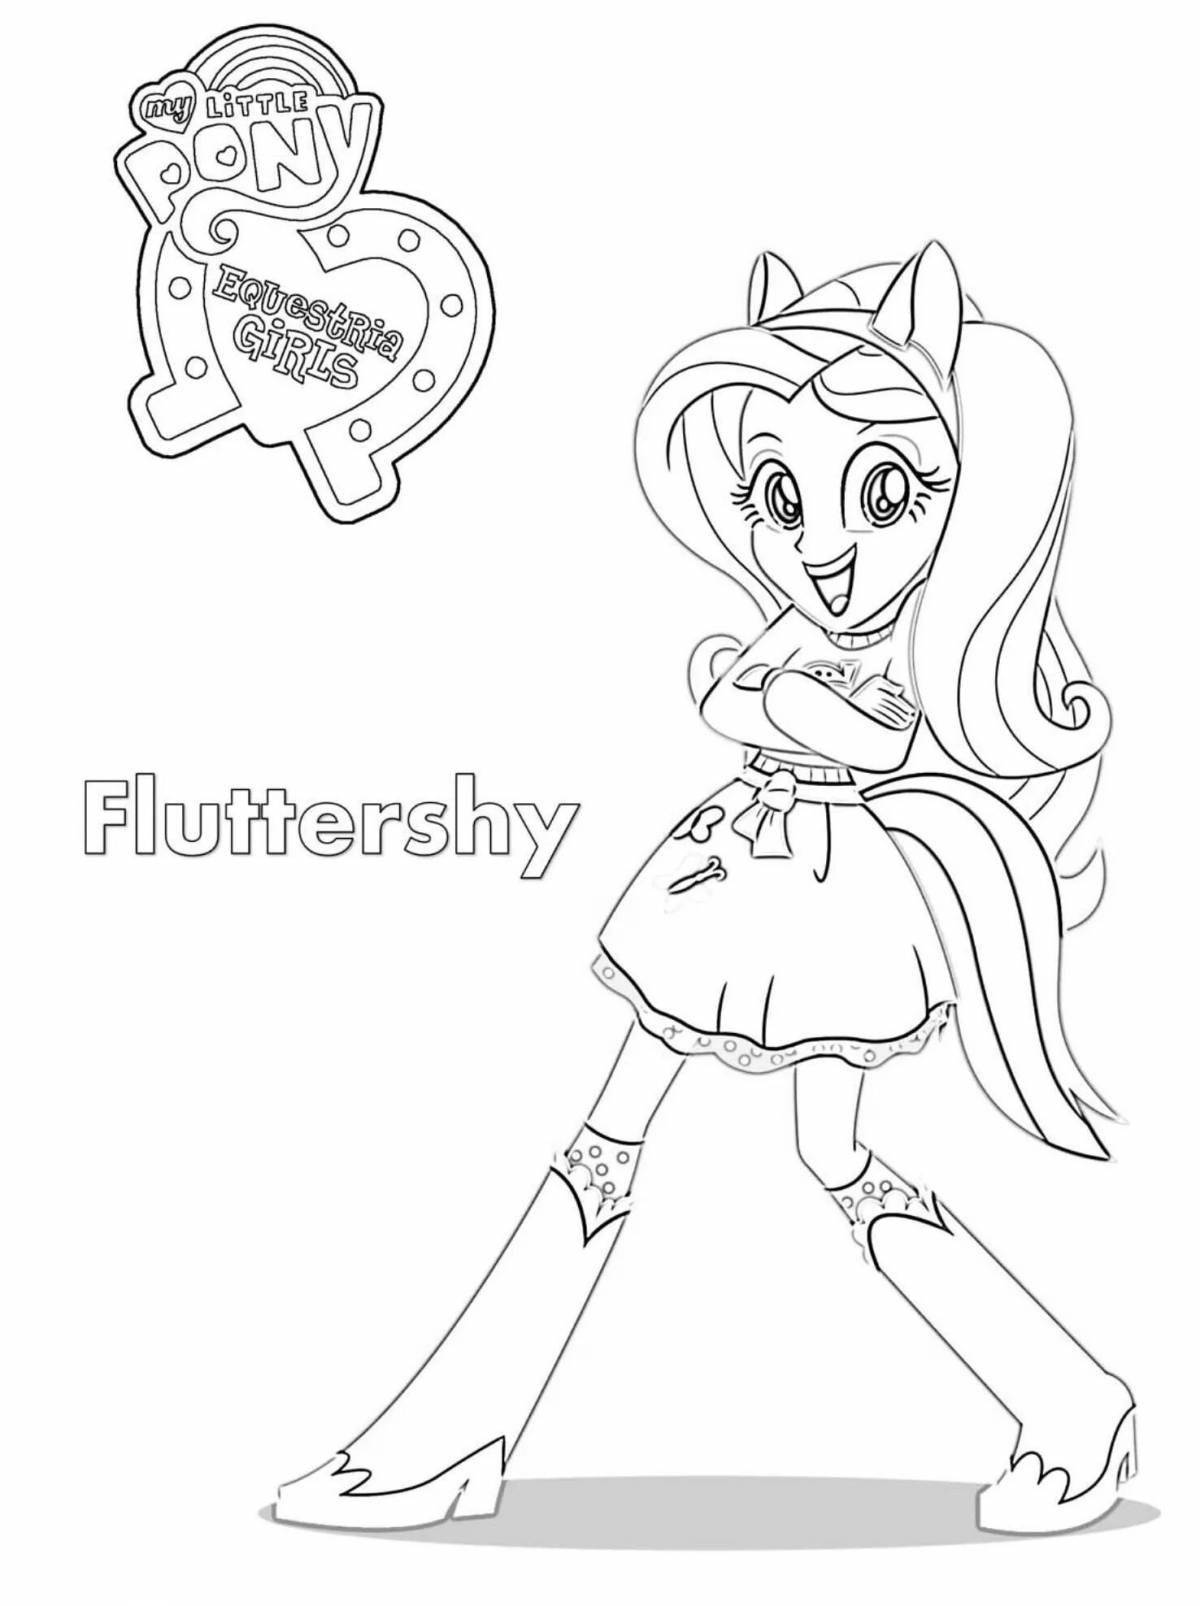 Adorable fluttershy coloring book